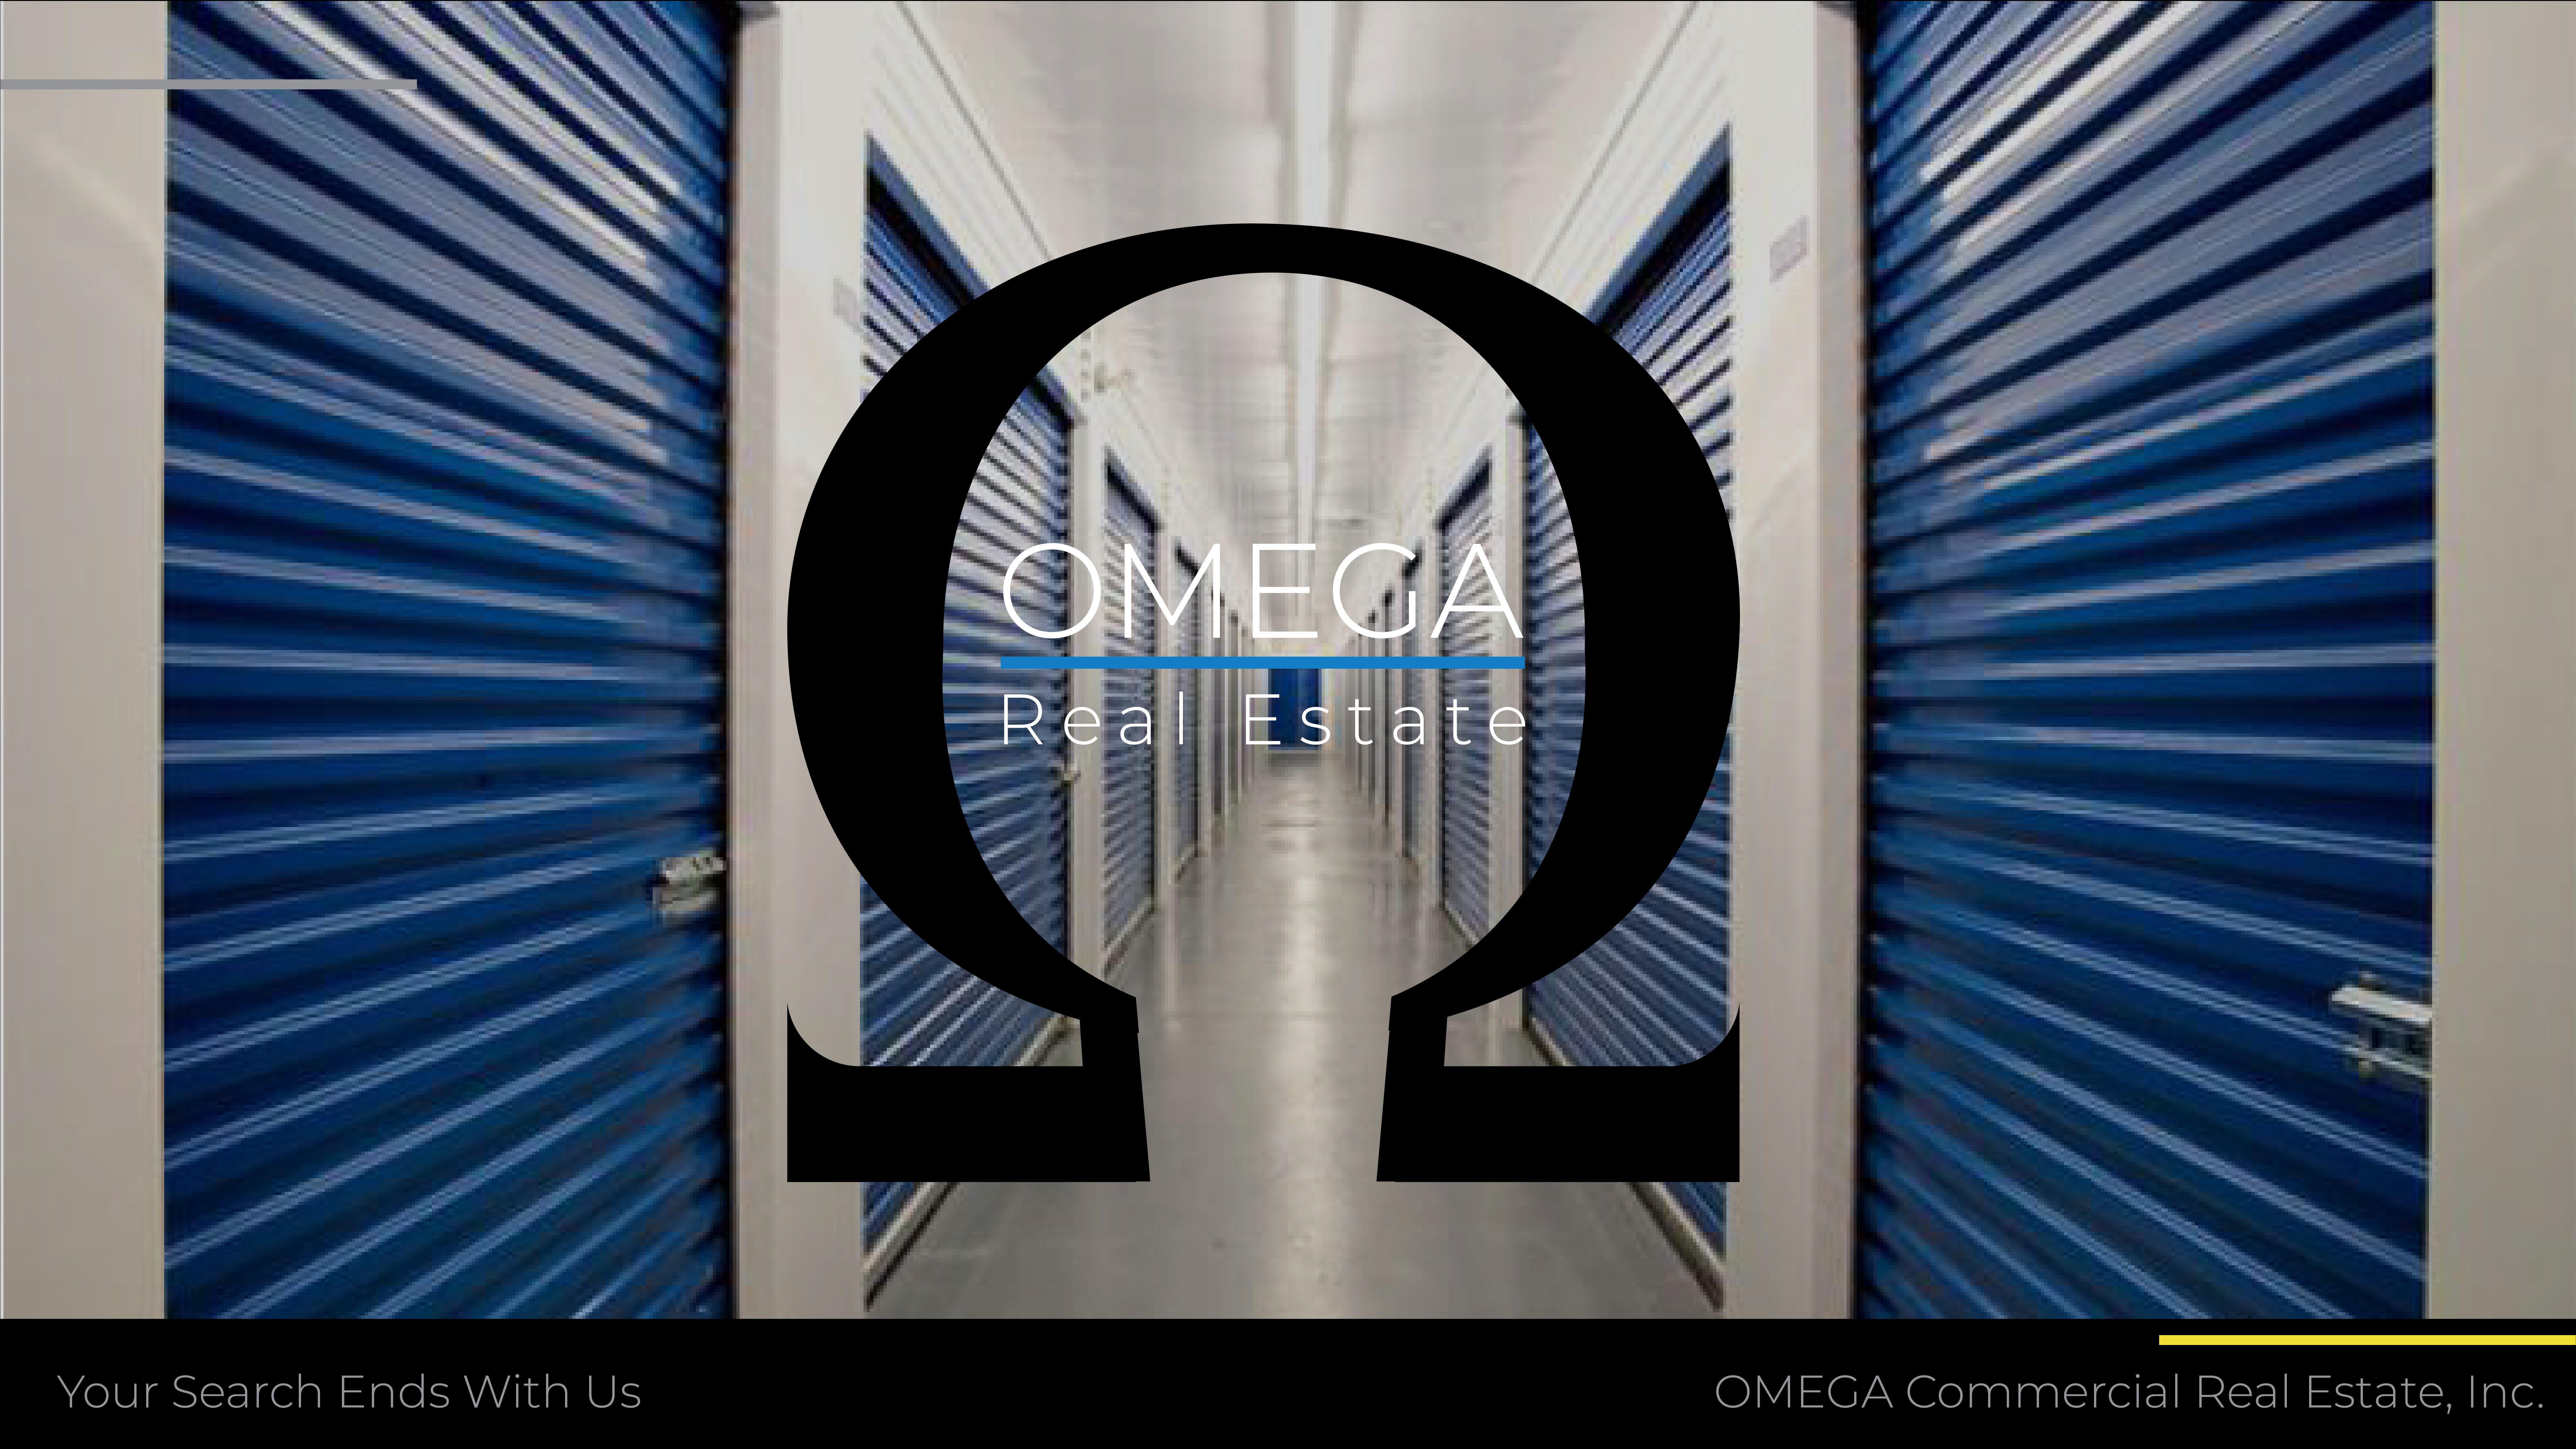 Self Storage Real Estate Picture For OMEGA Commercial Real Estate Serving Montgomery County, Chester County, Delaware County, Lehigh County, Berks County, Philadelphia, King of Prussia, Conshohocken, Phoenixville, Norristown, and more in Pennsylvania.